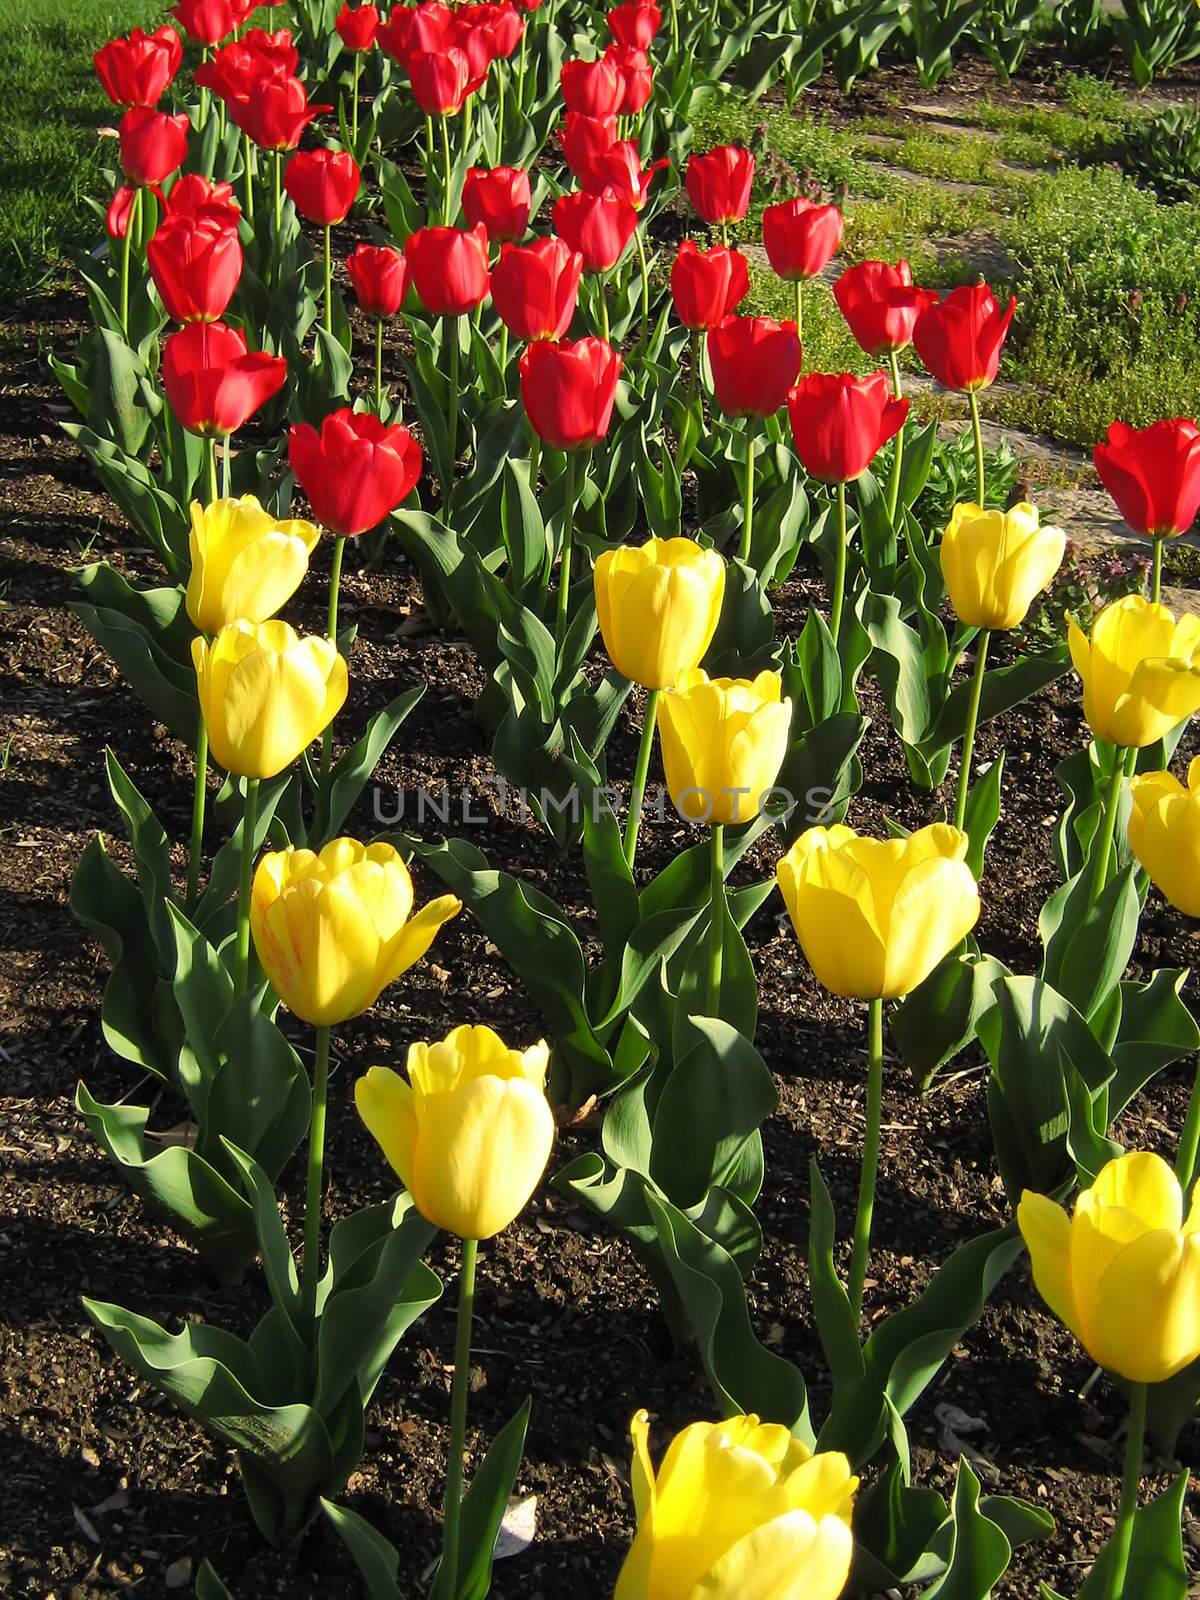 A photograph of red and yellow tulips blooming in a garden.